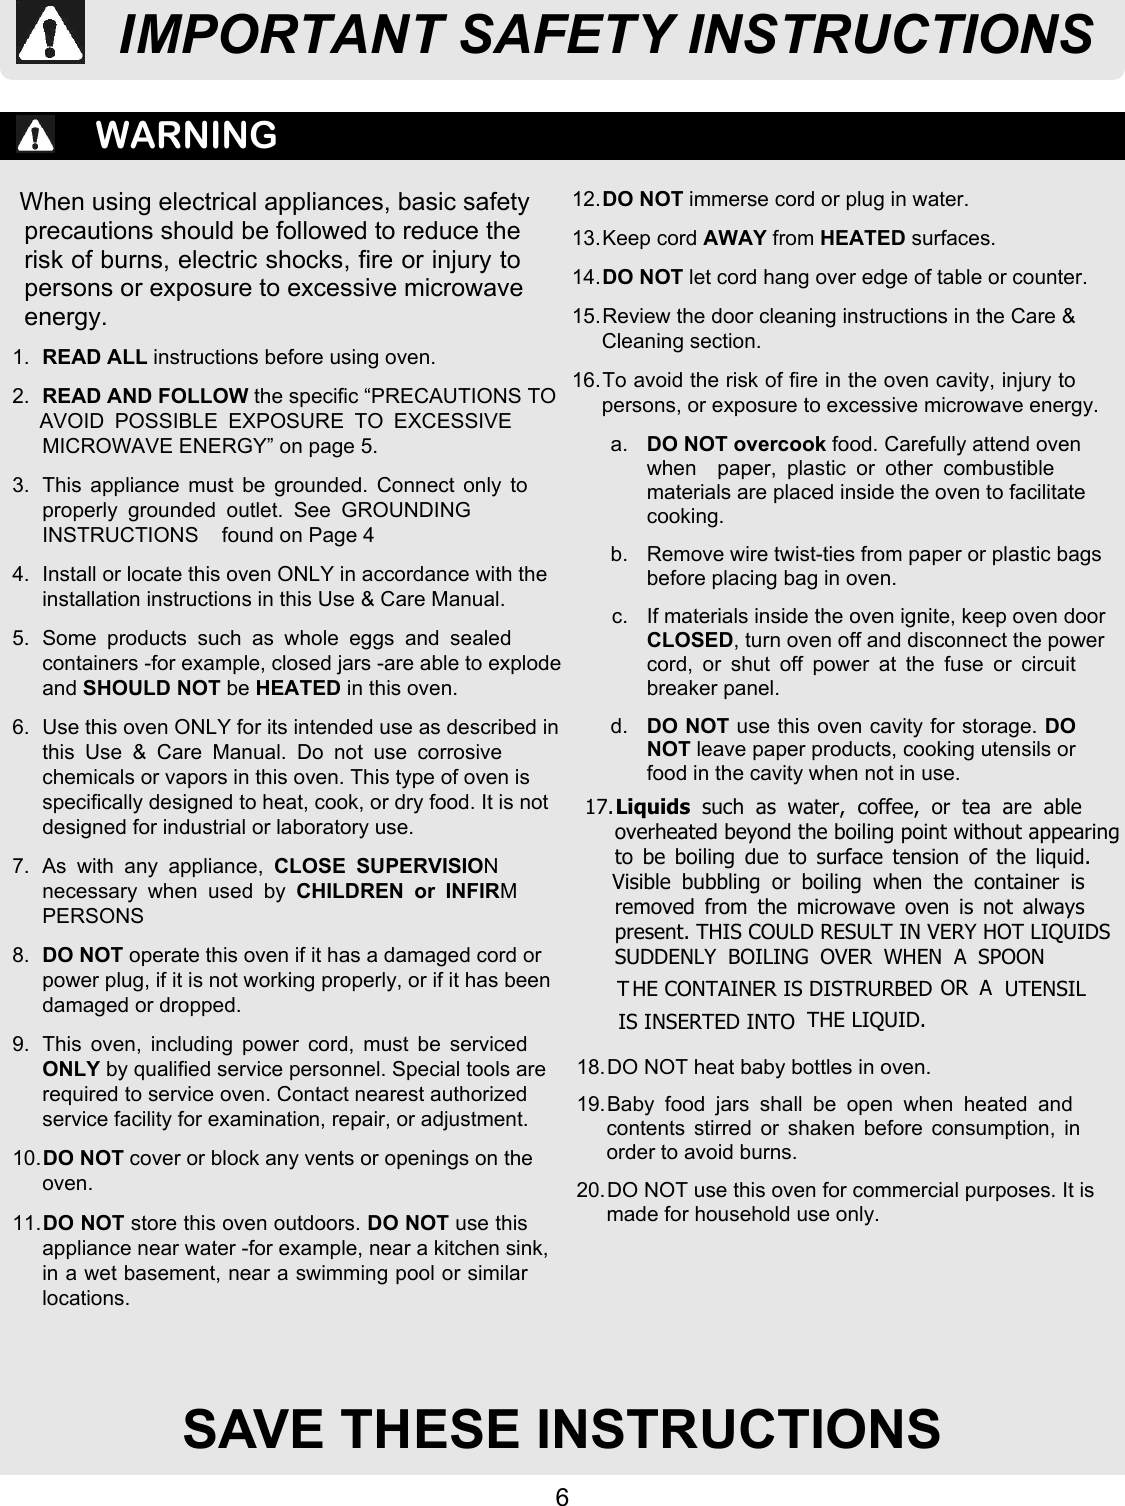 6SAVE THESE INSTRUCTIONSWARNINGWhen using electrical appliances, basic safetyprecautions should be followed to reduce therisk of burns, electric shocks, fire or injury topersons or exposure to excessive microwaveenergy.1. READ ALL instructions before using oven.2. READ AND FOLLOW the specific “PRECAUTIONS TOAVOID  POSSIBLE  EXPOSURE  TO  EXCESSIVEMICROWAVE ENERGY” on page 5.3.  This  appliance  must  be  grounded.  Connect only toproperly  grounded  outlet.  See  GROUNDINGINSTRUCTIONS    found on Page 44.  Install or locate this oven ONLY in accordance with theinstallation instructions in this Use &amp; Care Manual.5.  Some  products  such  as  whole  eggs  and  sealedcontainers -for example, closed jars -are able to explodeand SHOULD NOT be HEATED in this oven.6.  Use this oven ONLY for its intended use as described inthis  Use  &amp;  Care  Manual.  Do  not  use  corrosivechemicals or vapors in this oven. This type of oven isspecifically designed to heat, cook, or dry food. It is notdesigned for industrial or laboratory use.7.  As  with  any  appliance, CLOSE  SUPERVISIONnecessary  when  used  by CHILDREN  or  INFIRMPERSONS8. DO NOT operate this oven if it has a damaged cord orpower plug, if it is not working properly, or if it has beendamaged or dropped.9.  This  oven,  including  power  cord,  must  be  servicedONLY by qualified service personnel. Special tools arerequired to service oven. Contact nearest authorizedservice facility for examination, repair, or adjustment.10.DO NOT cover or block any vents or openings on theoven.11.DO NOT store this oven outdoors. DO NOT use thisappliance near water -for example, near a kitchen sink,in a wet basement, near a swimming pool or similarlocations.12.DO NOT immerse cord or plug in water.13. Keep cord AWAY from HEATED surfaces.14.DO NOT let cord hang over edge of table or counter.15. Review the door cleaning instructions in the Care &amp;Cleaning section.16. To avoid the risk of fire in the oven cavity, injury topersons, or exposure to excessive microwave energy.a. DO NOT overcook food. Carefully attend ovenwhen    paper,  plastic  or  other  combustiblematerials are placed inside the oven to facilitatecooking.b.  Remove wire twist-ties from paper or plastic bagsbefore placing bag in oven.c.  If materials inside the oven ignite, keep oven doorCLOSED, turn oven off and disconnect the powercord,  or  shut  off  power  at  the  fuse  or  circuitbreaker panel.d. DO NOT use this oven cavity for storage. DONOT leave paper products, cooking utensils orfood in the cavity when not in use.18. DO NOT heat baby bottles in oven.19. Baby  food  jars  shall  be  open  when  heated  andcontents stirred or shaken before consumption, inorder to avoid burns.20. DO NOT use this oven for commercial purposes. It ismade for household use only.IMPORTANT SAFETY INSTRUCTIONS17.Liquids  such  as  water,  coffee,  or  tea  are  ableoverheated beyond the boiling point without appearingto  be  boiling  due  to  surface  tension  of  the  liquid.Visible  bubbling  or  boiling  when  the  container  isremoved  from  the  microwave  oven  is  not  alwayspresent. THIS COULD RESULT IN VERY HOT LIQUIDSSUDDENLY  BOILING  OVER  WHEN  A  SPOON OR UTENSIL IS INSERTED INTO  THE LIQUID.THE CONTAINER IS DISTRURBED  A